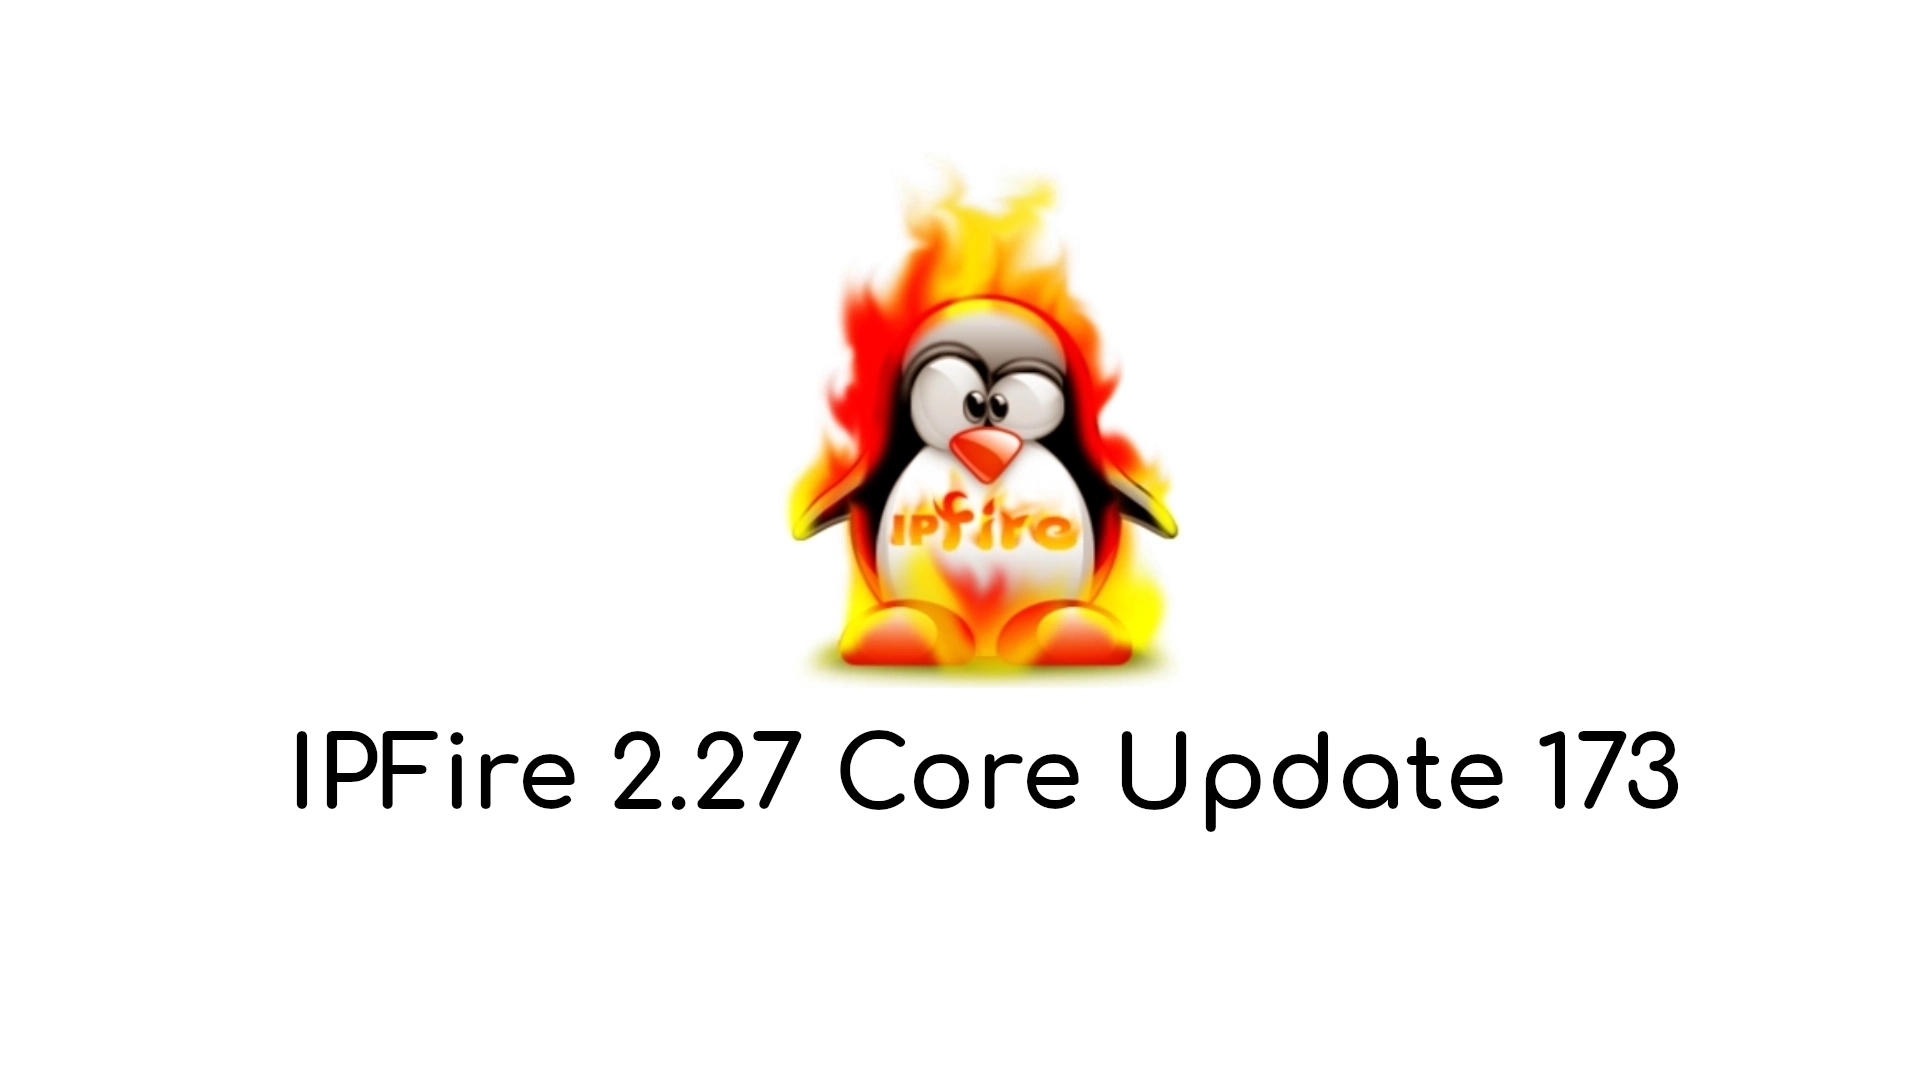 IPFire Hardened Linux Firewall Distro Is Now Powered by Linux Kernel 6.1 LTS